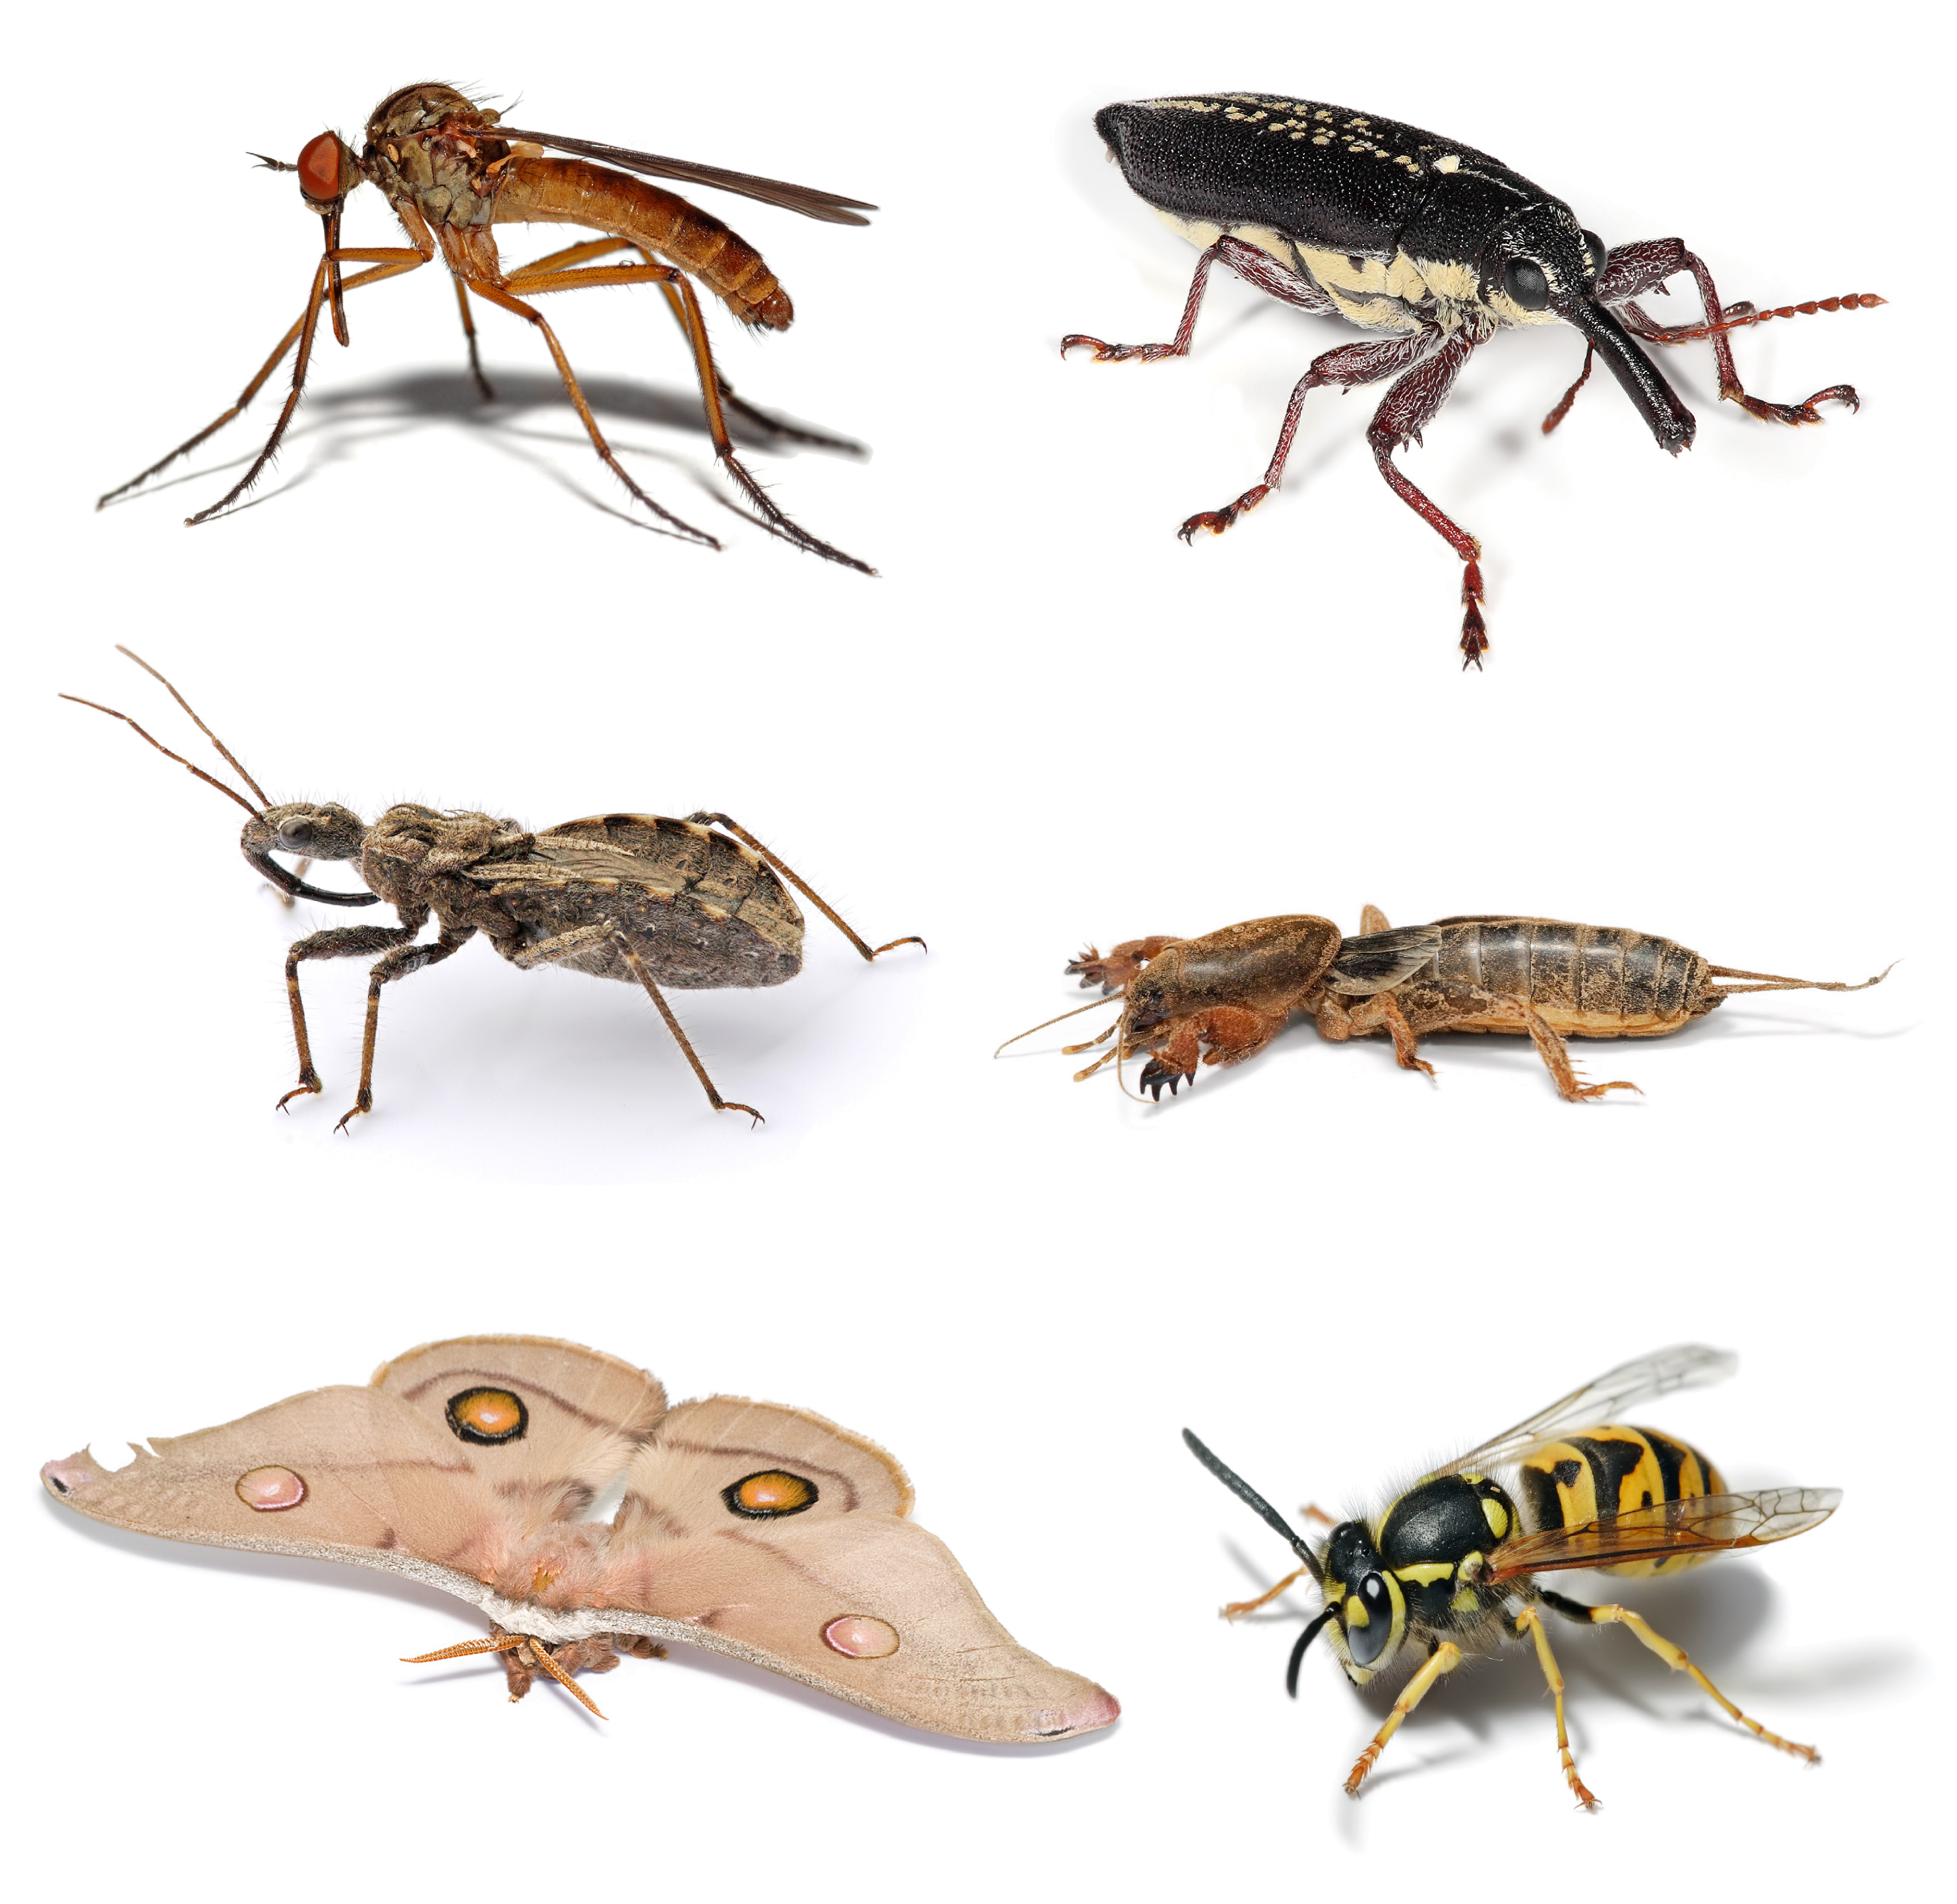 How many legs do all insects?